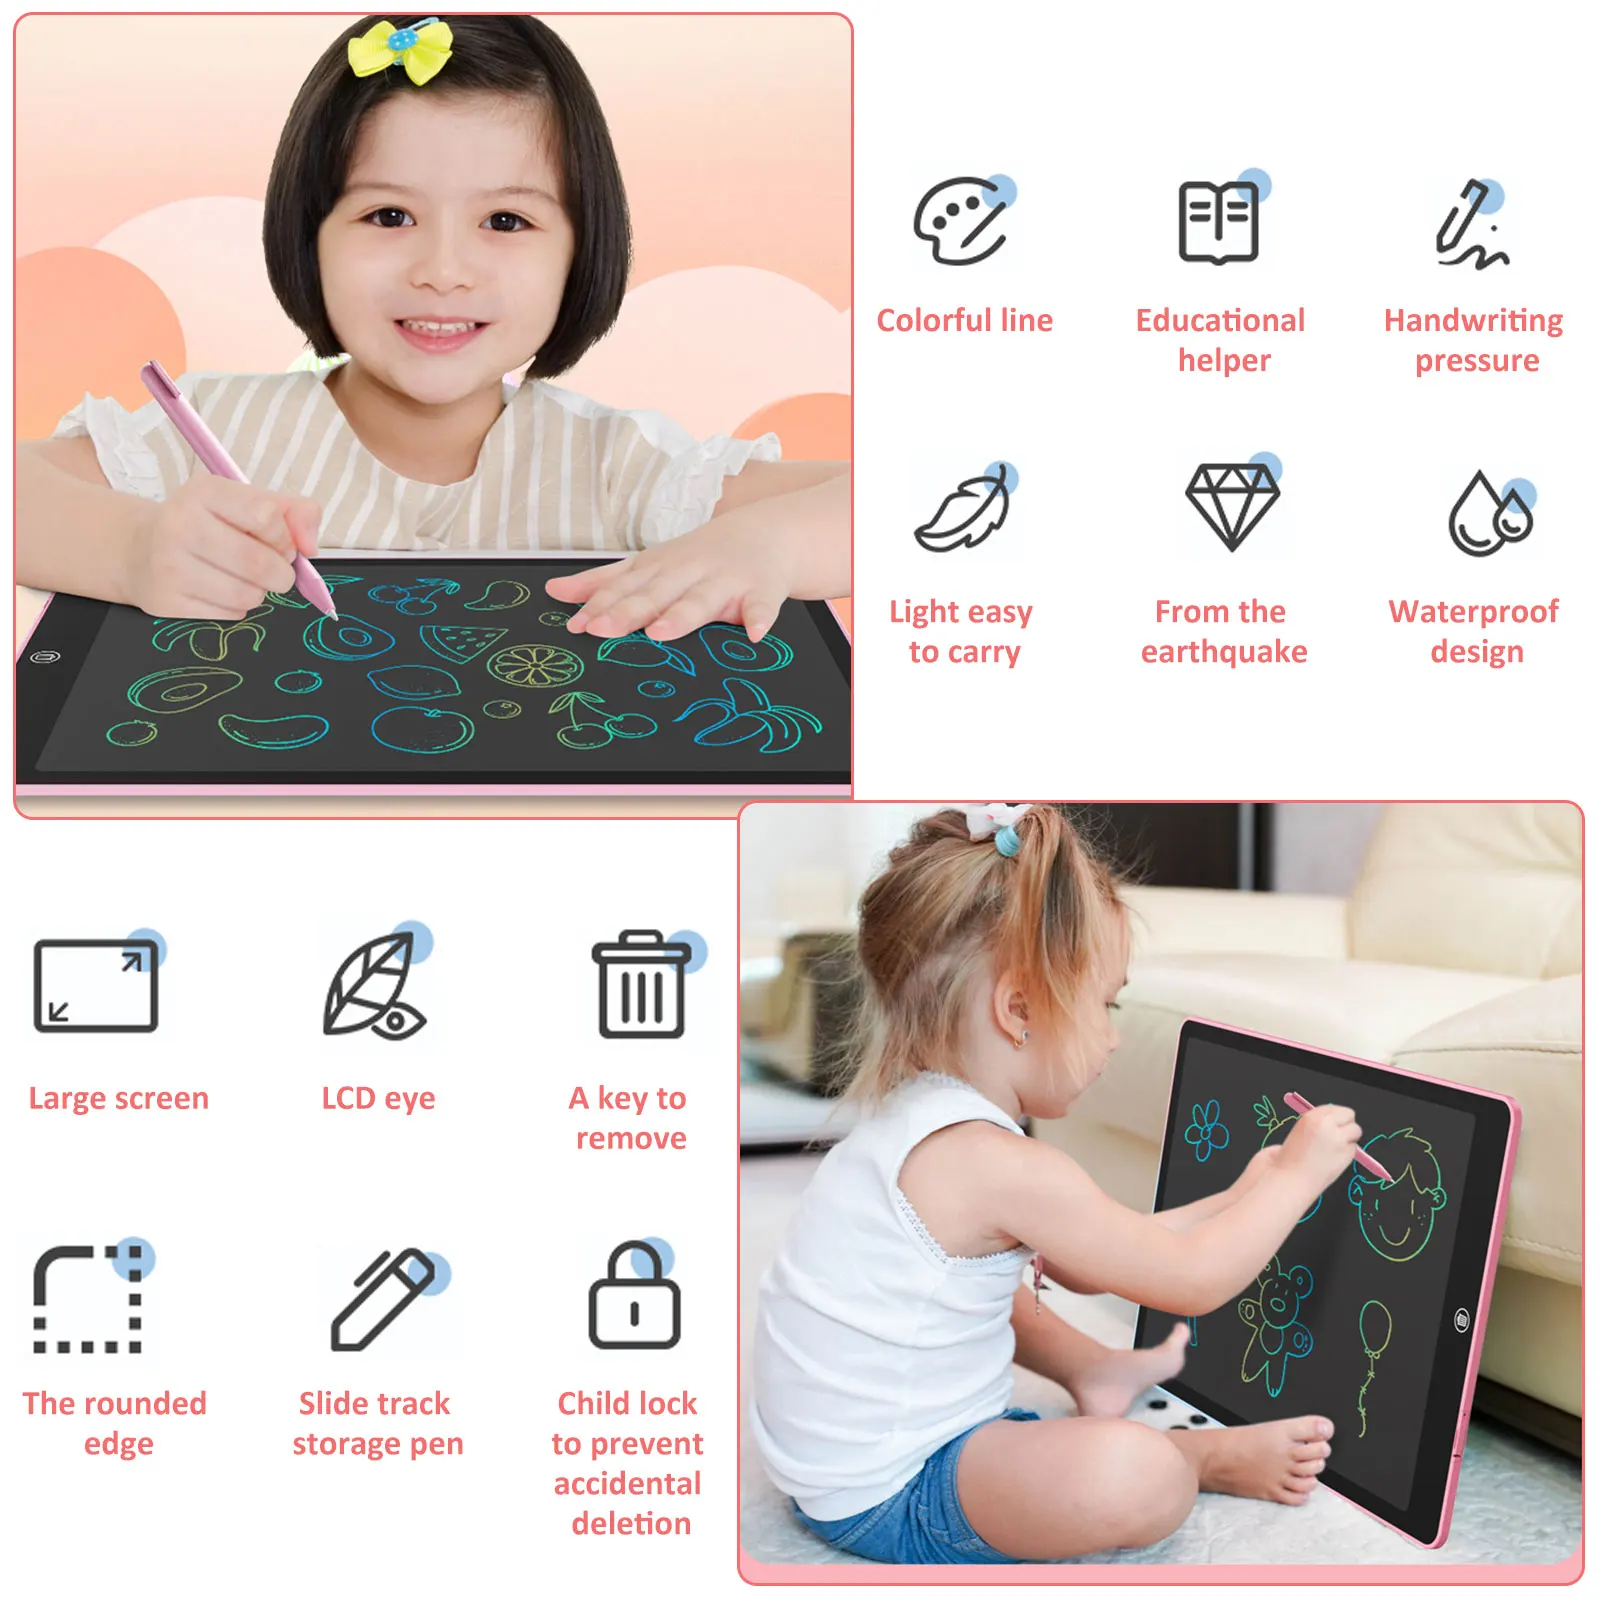 https://ae01.alicdn.com/kf/S4ff23e80a60b4dd1854ed646815d6af18/New-16inch-Children-Magic-Blackboard-LCD-Drawing-Tablet-Toys-For-Girls-Gifts-Digital-Notebook-Big-Size.jpg